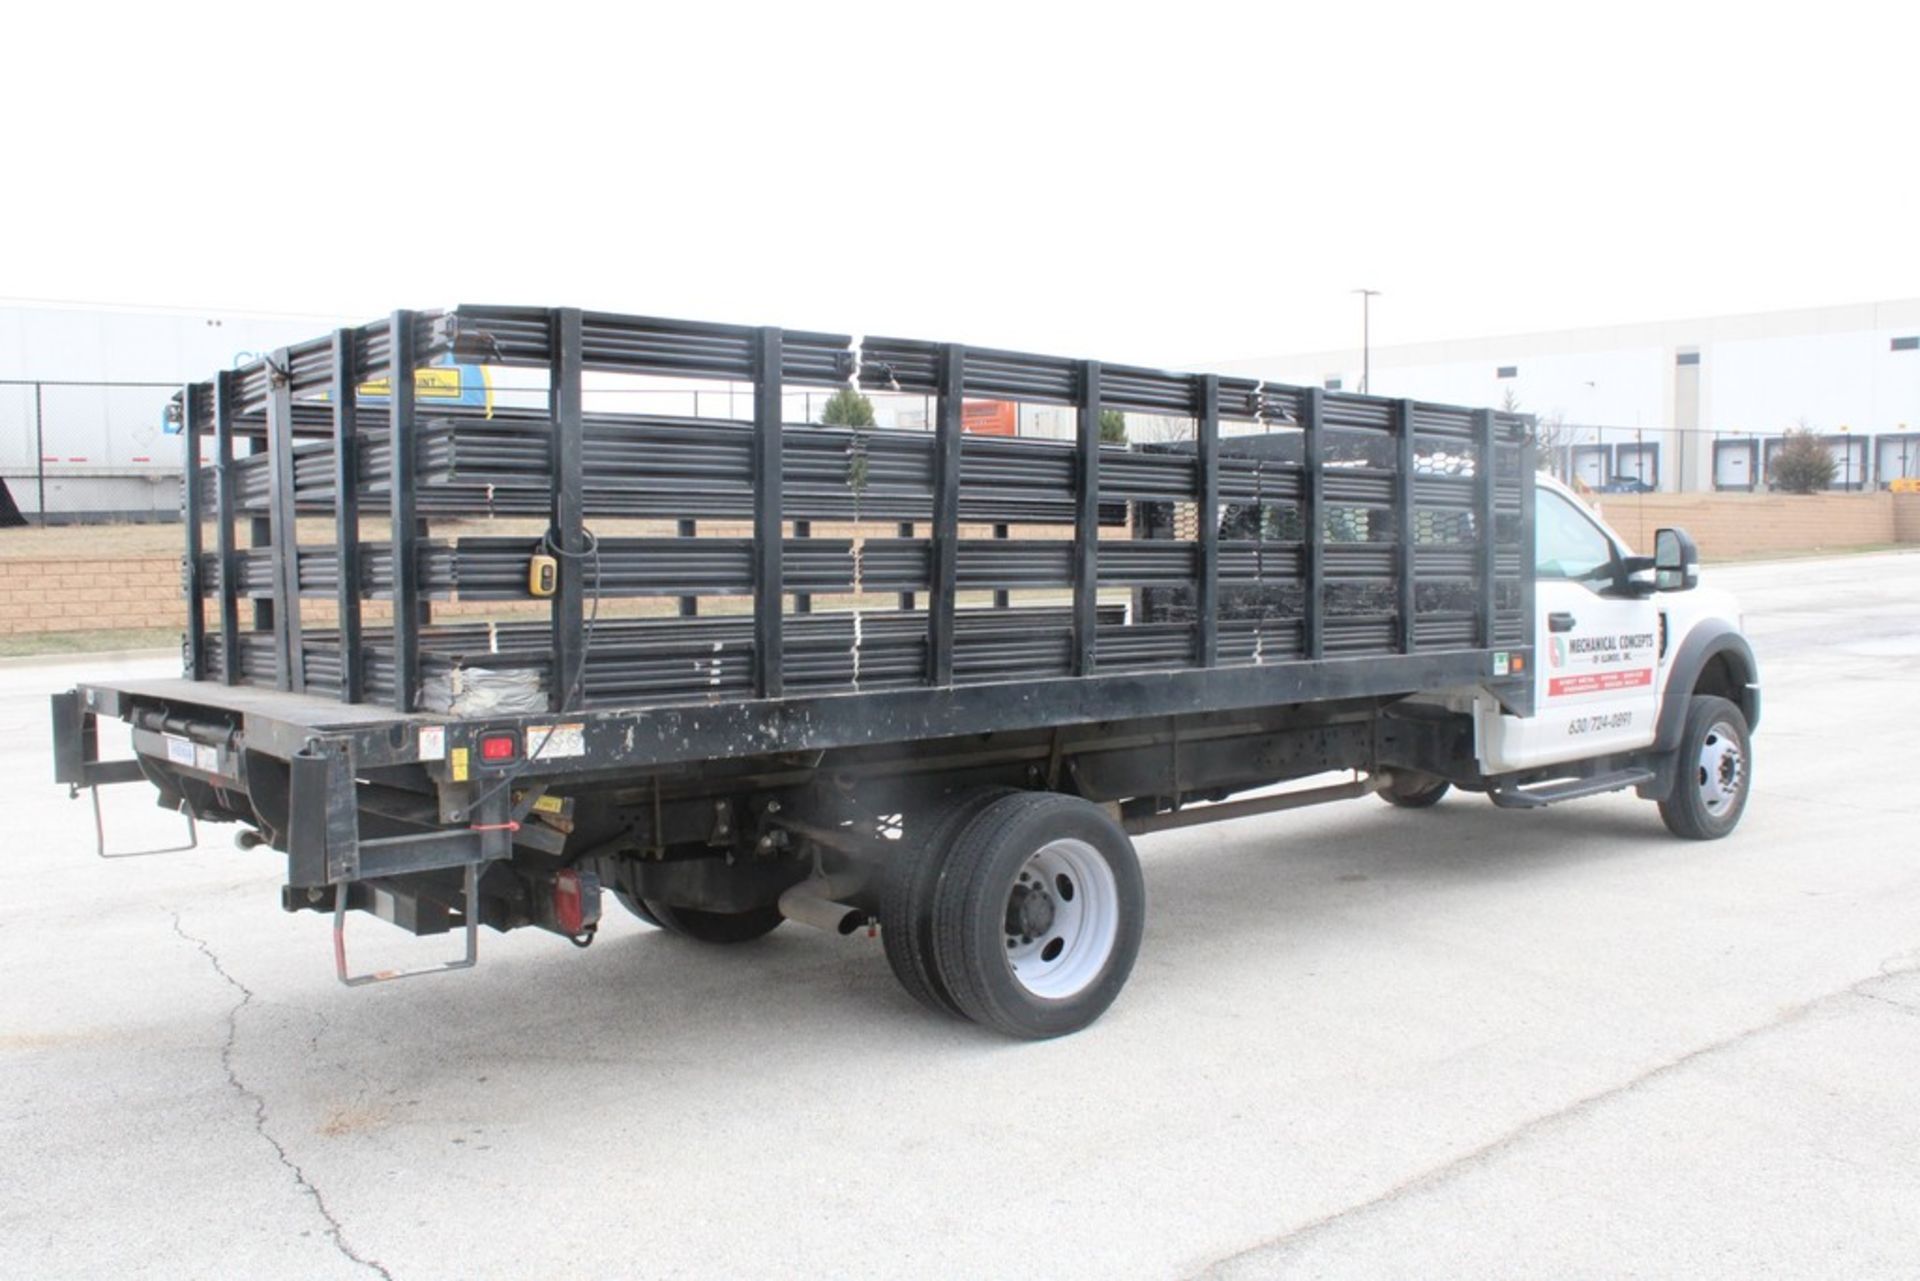 FORD MODEL F450XL 16' STAKE BED TRUCK - Image 5 of 13